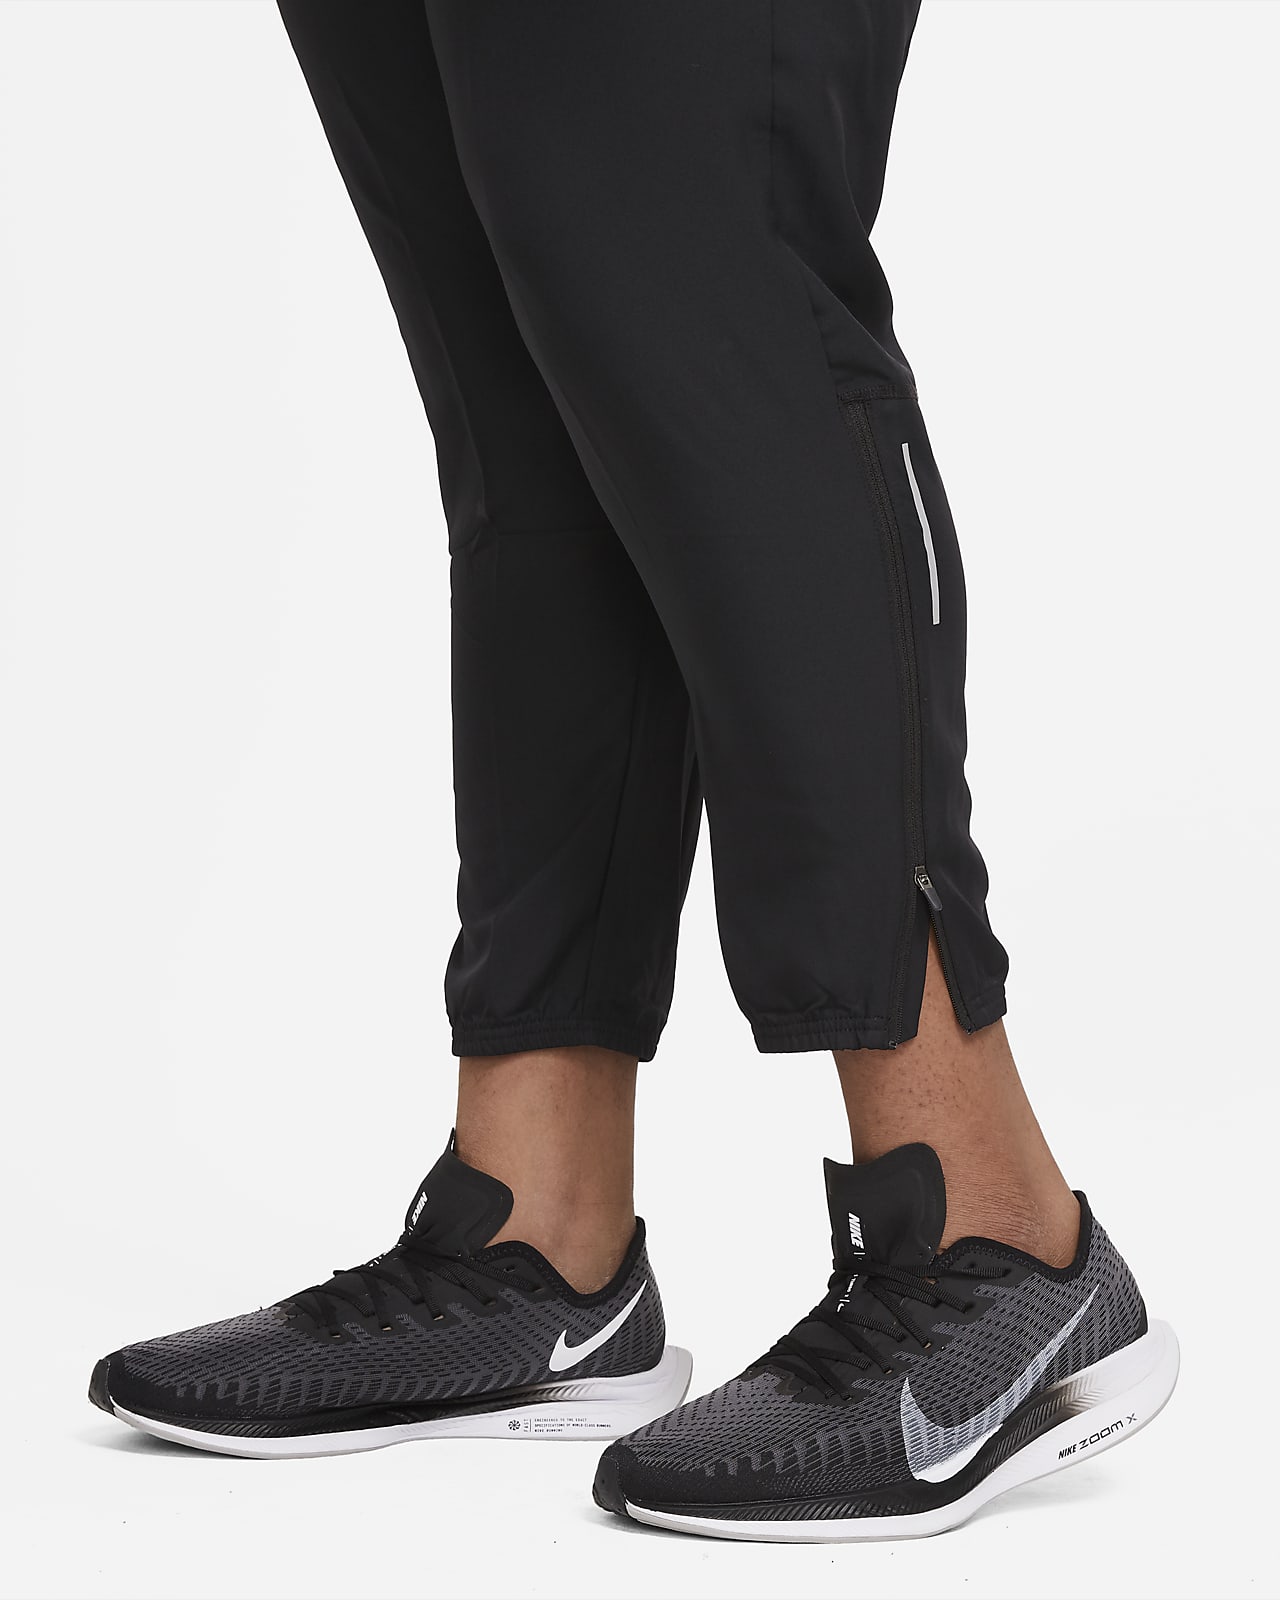 nike essential woven joggers